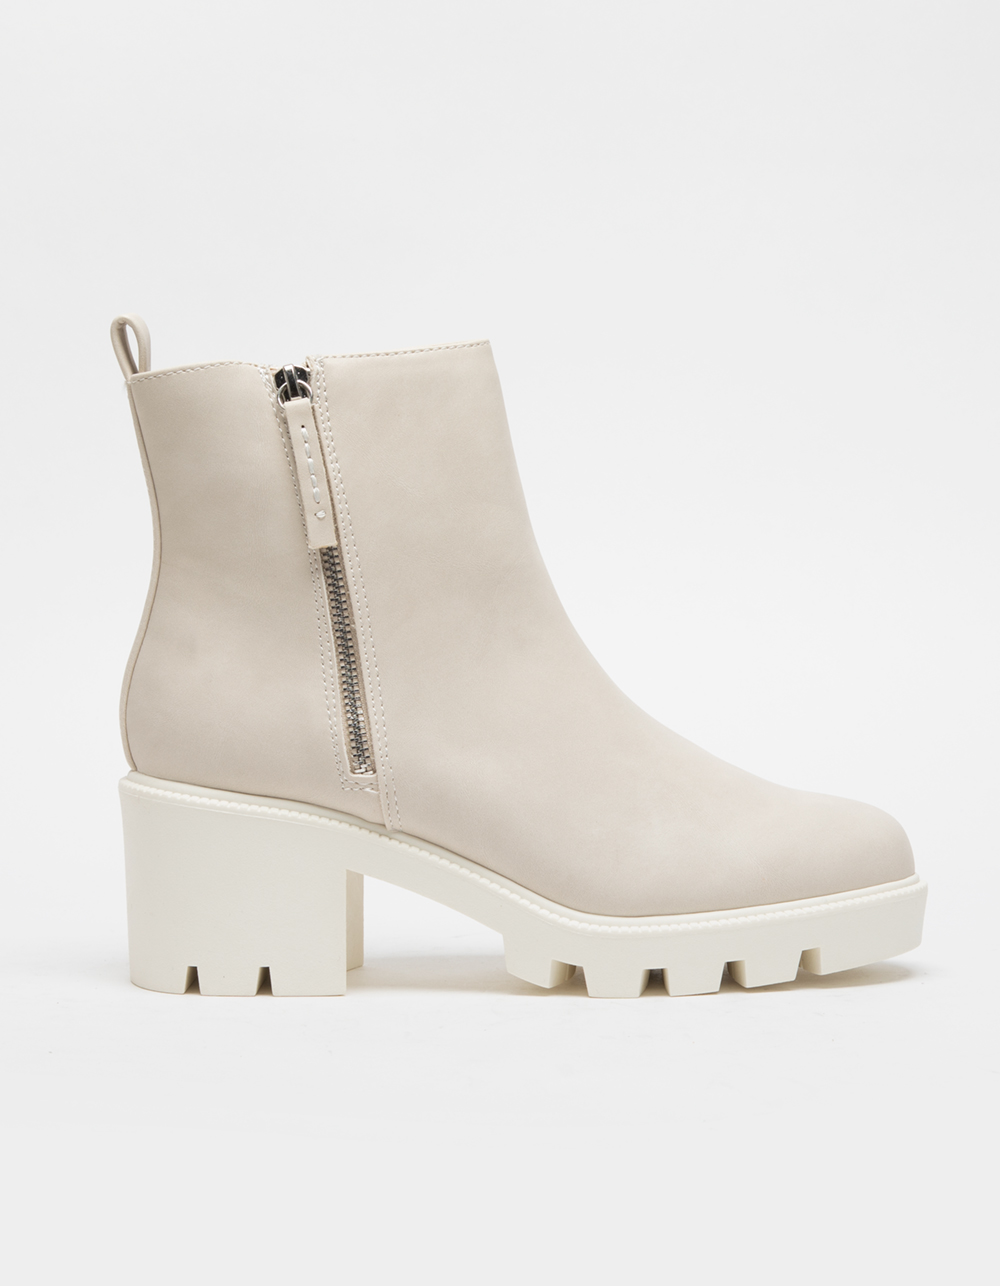 DOLCE VITA Nicola Womens Boots - OFWHT | Tillys